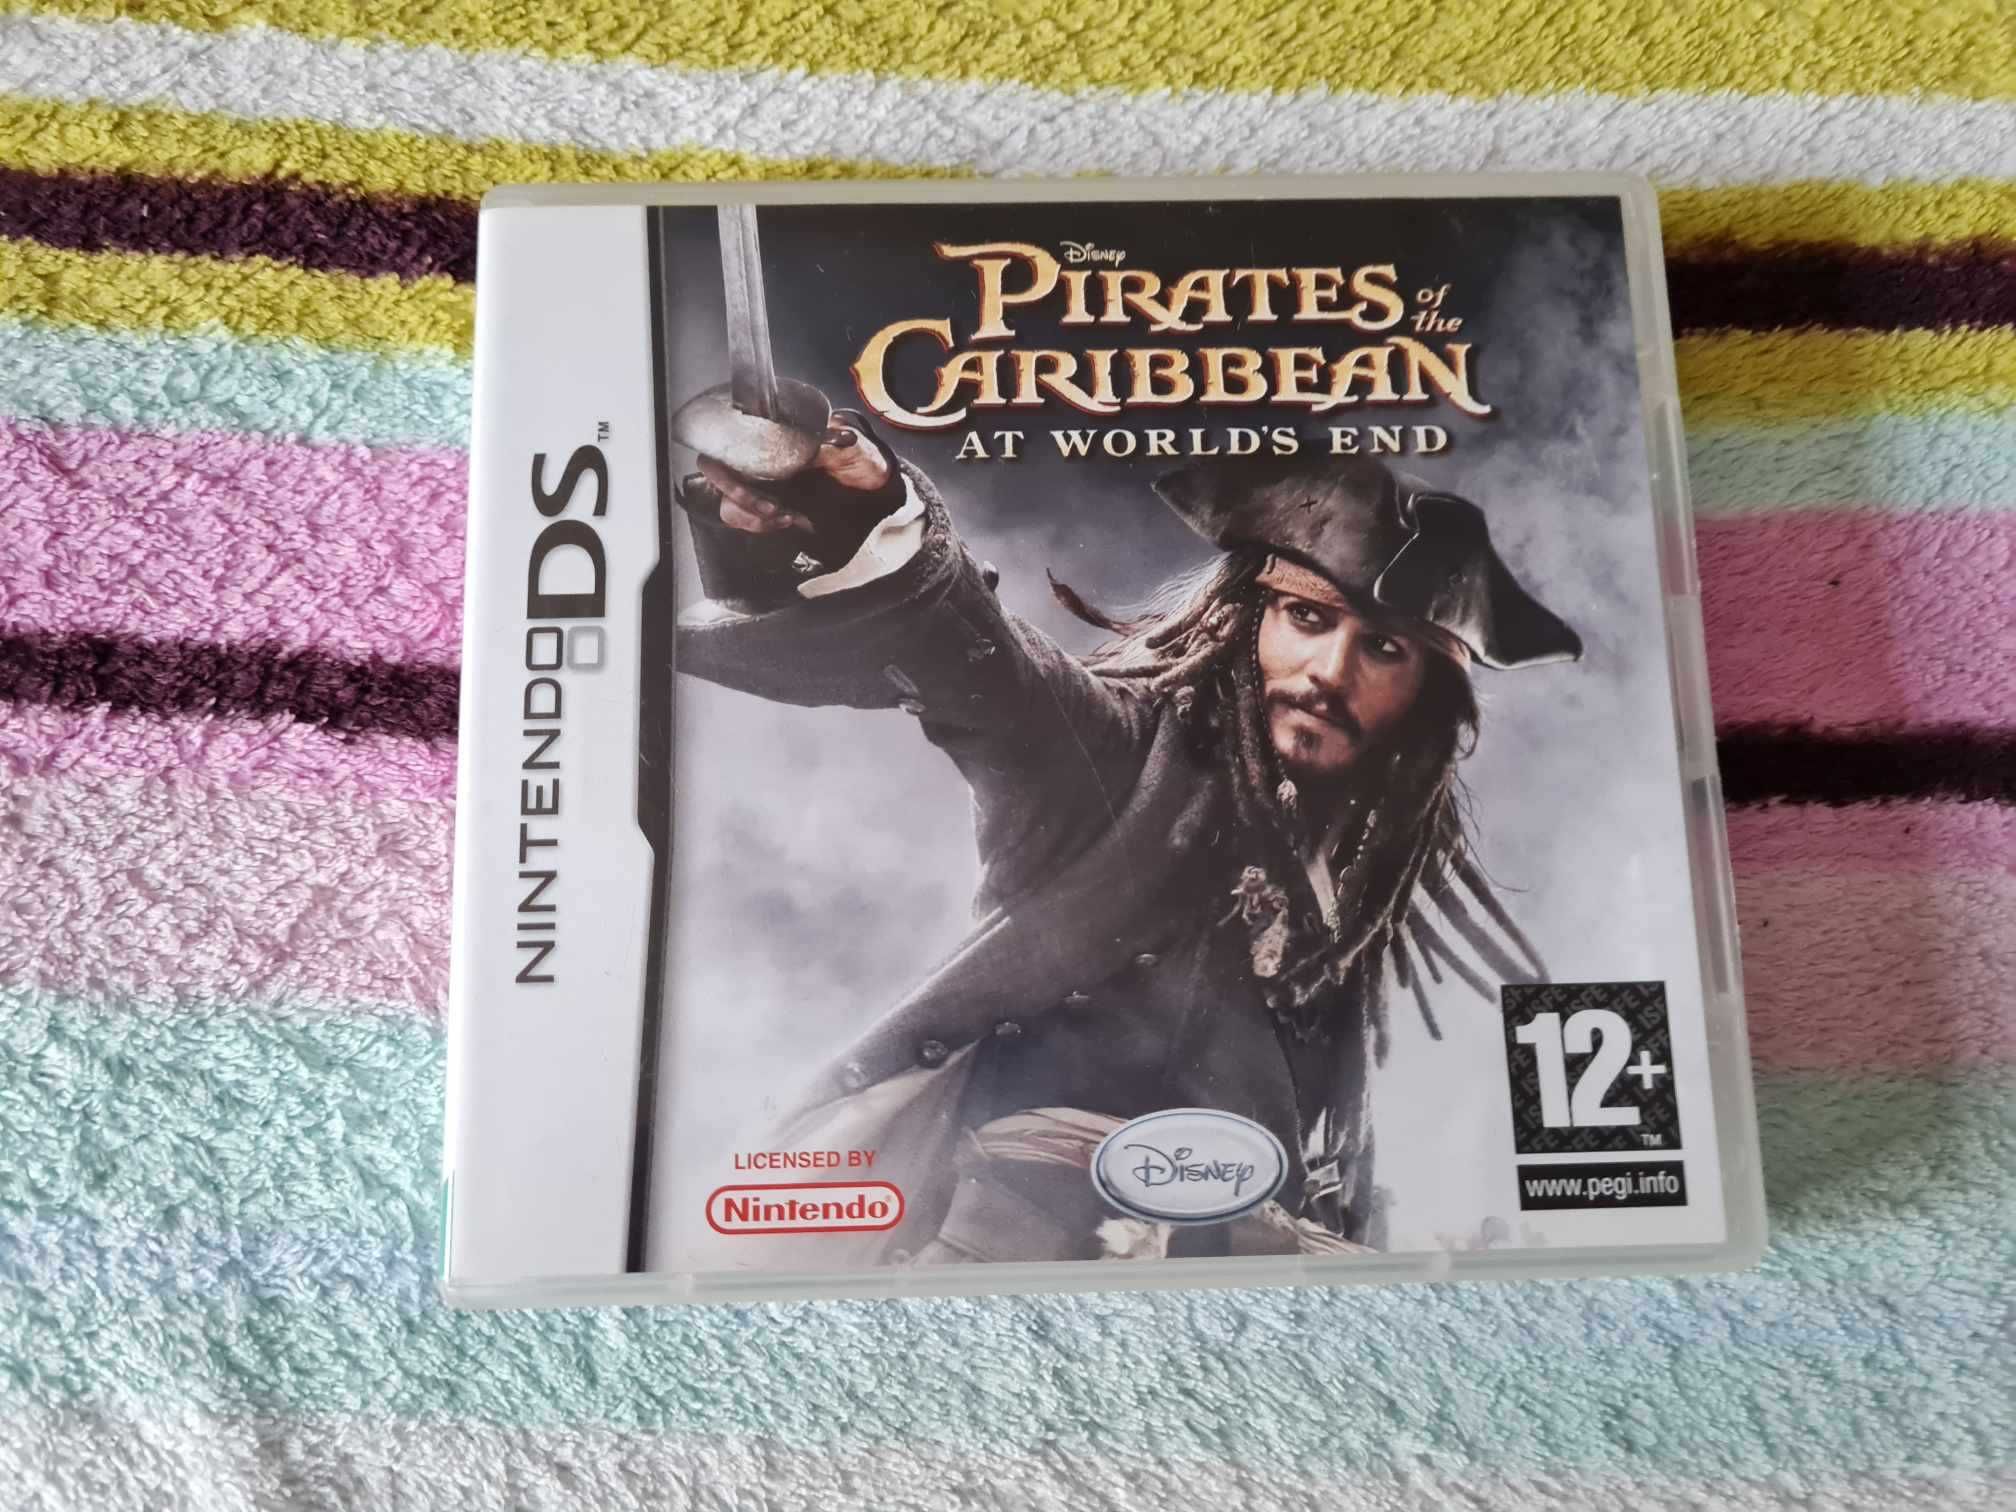 Disney - Pirates of the Caribbean at world's end - gra na Nintendo DS